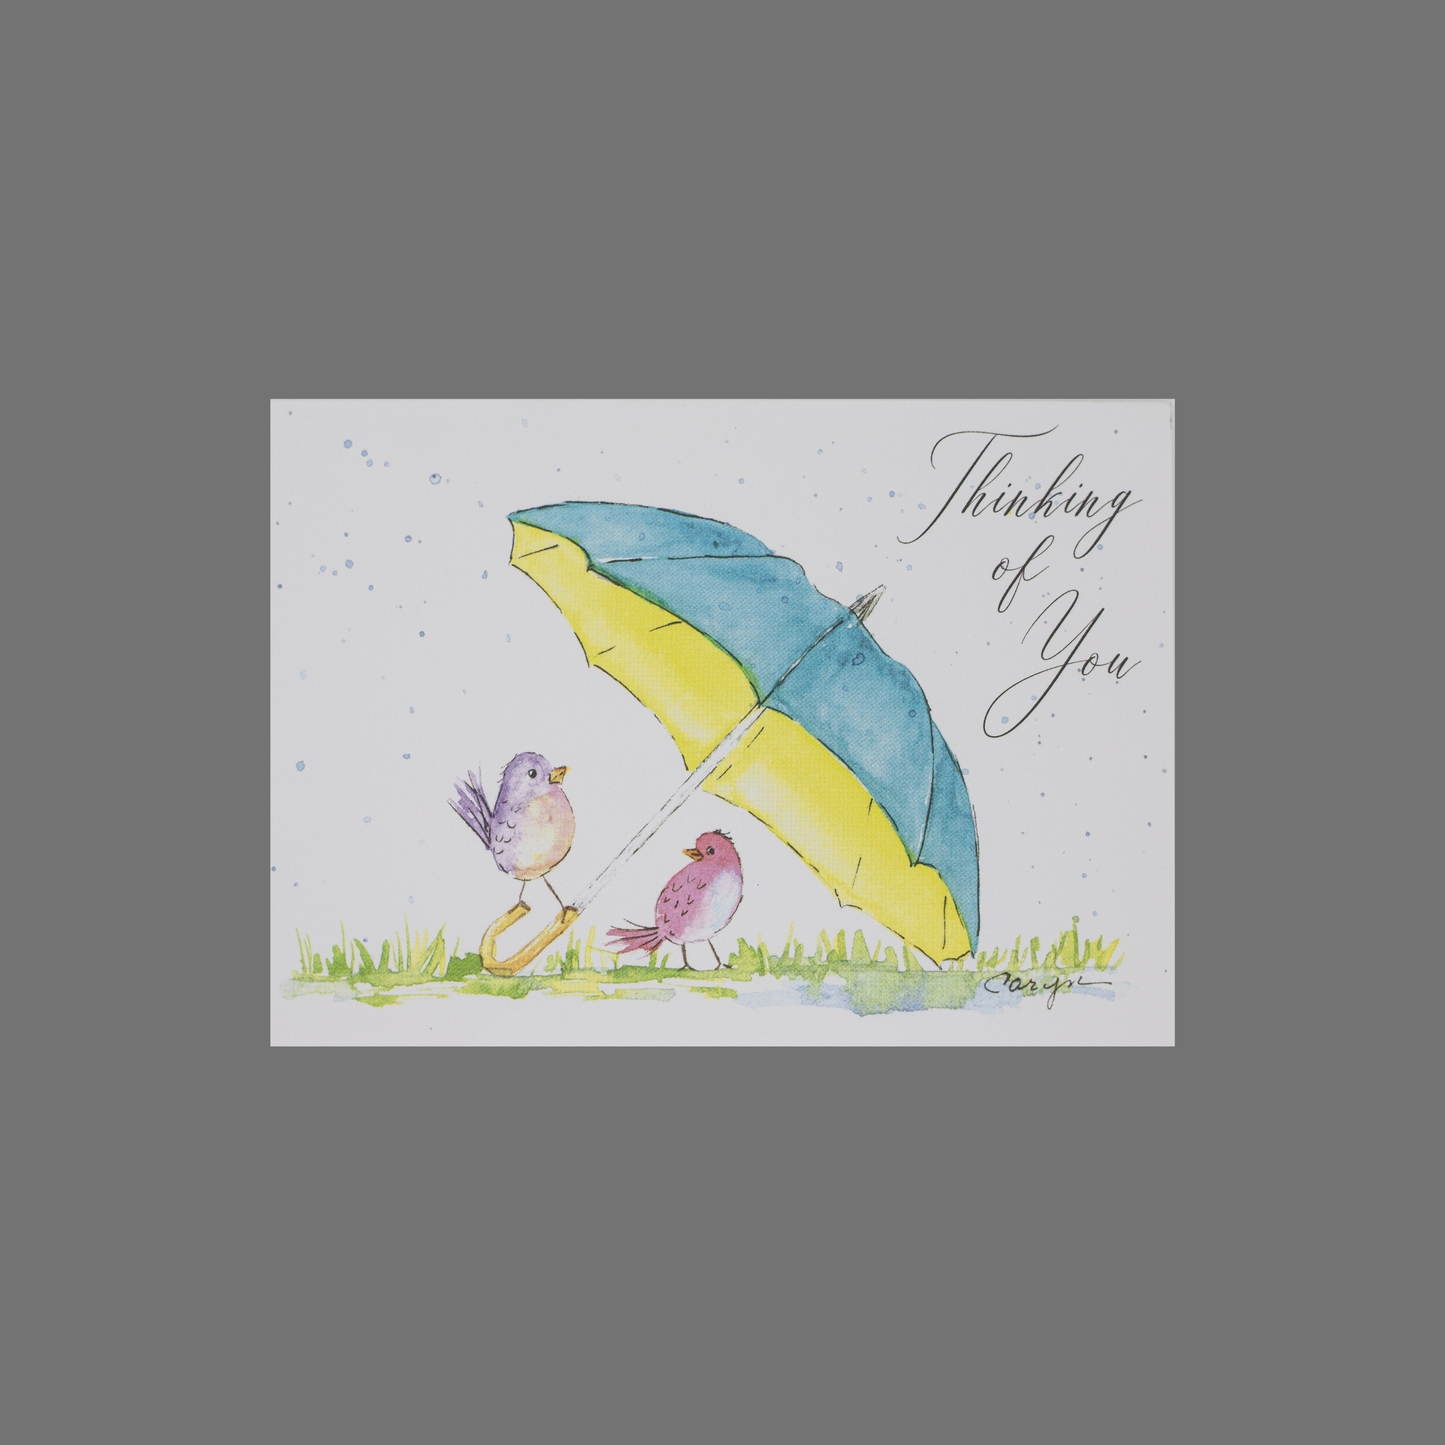 Pack of 8 - "Thinking of You" with Umbrella and Birds (10087)